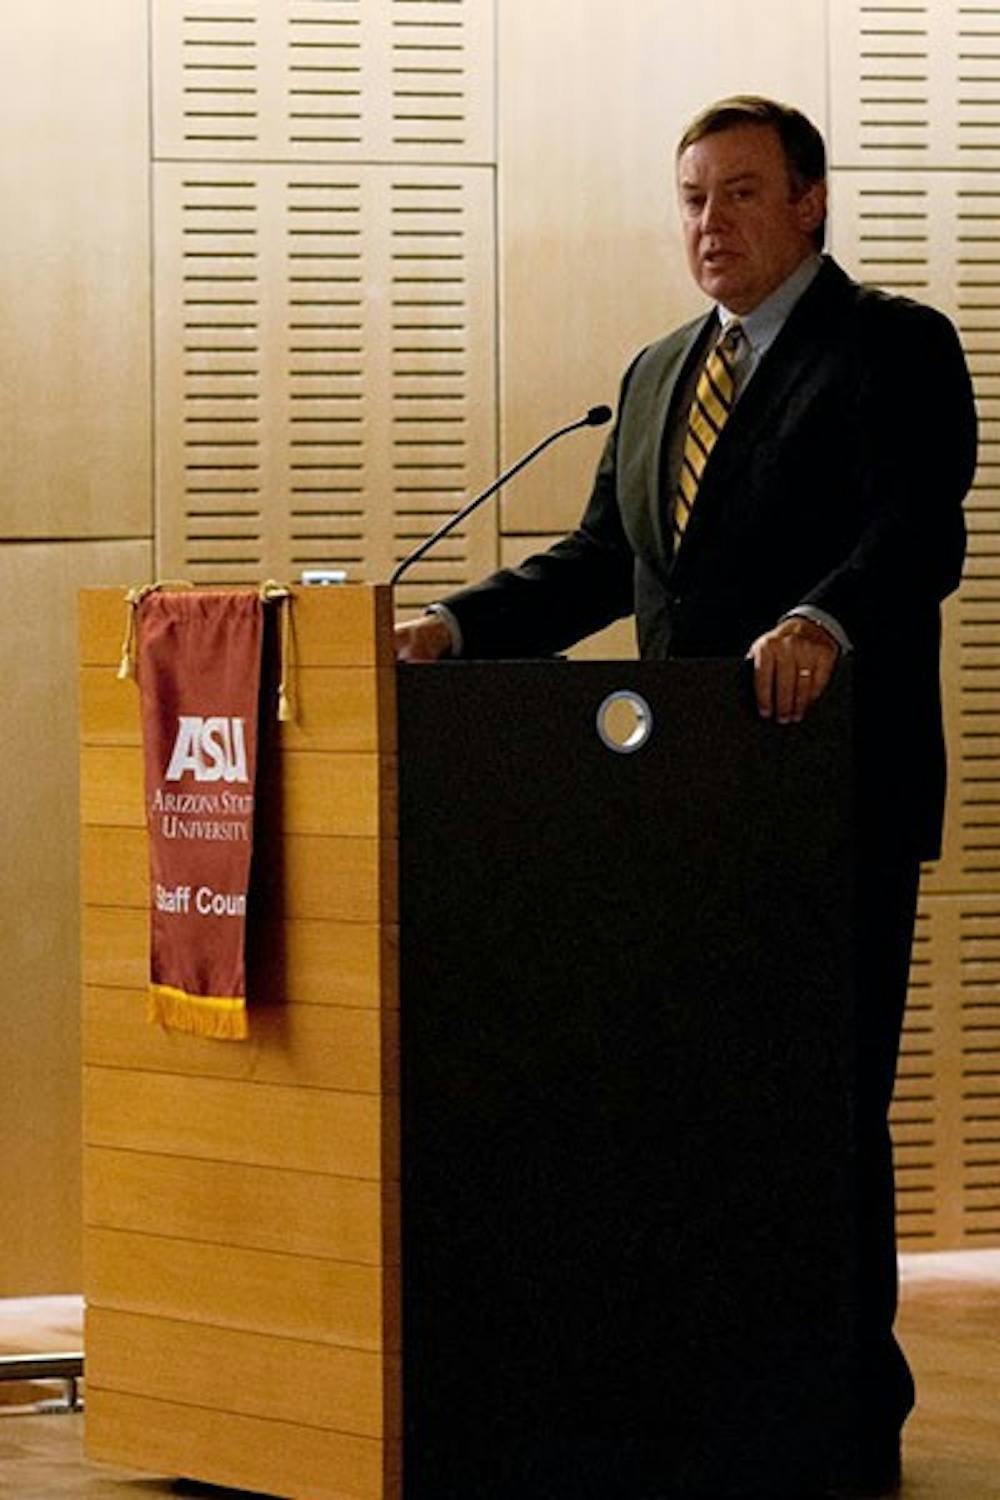 President Michael Crow answers questions at a Q&A session on April 29, which was broadcasted live to all ASU campuses.  (Photo by Mario Mendez)